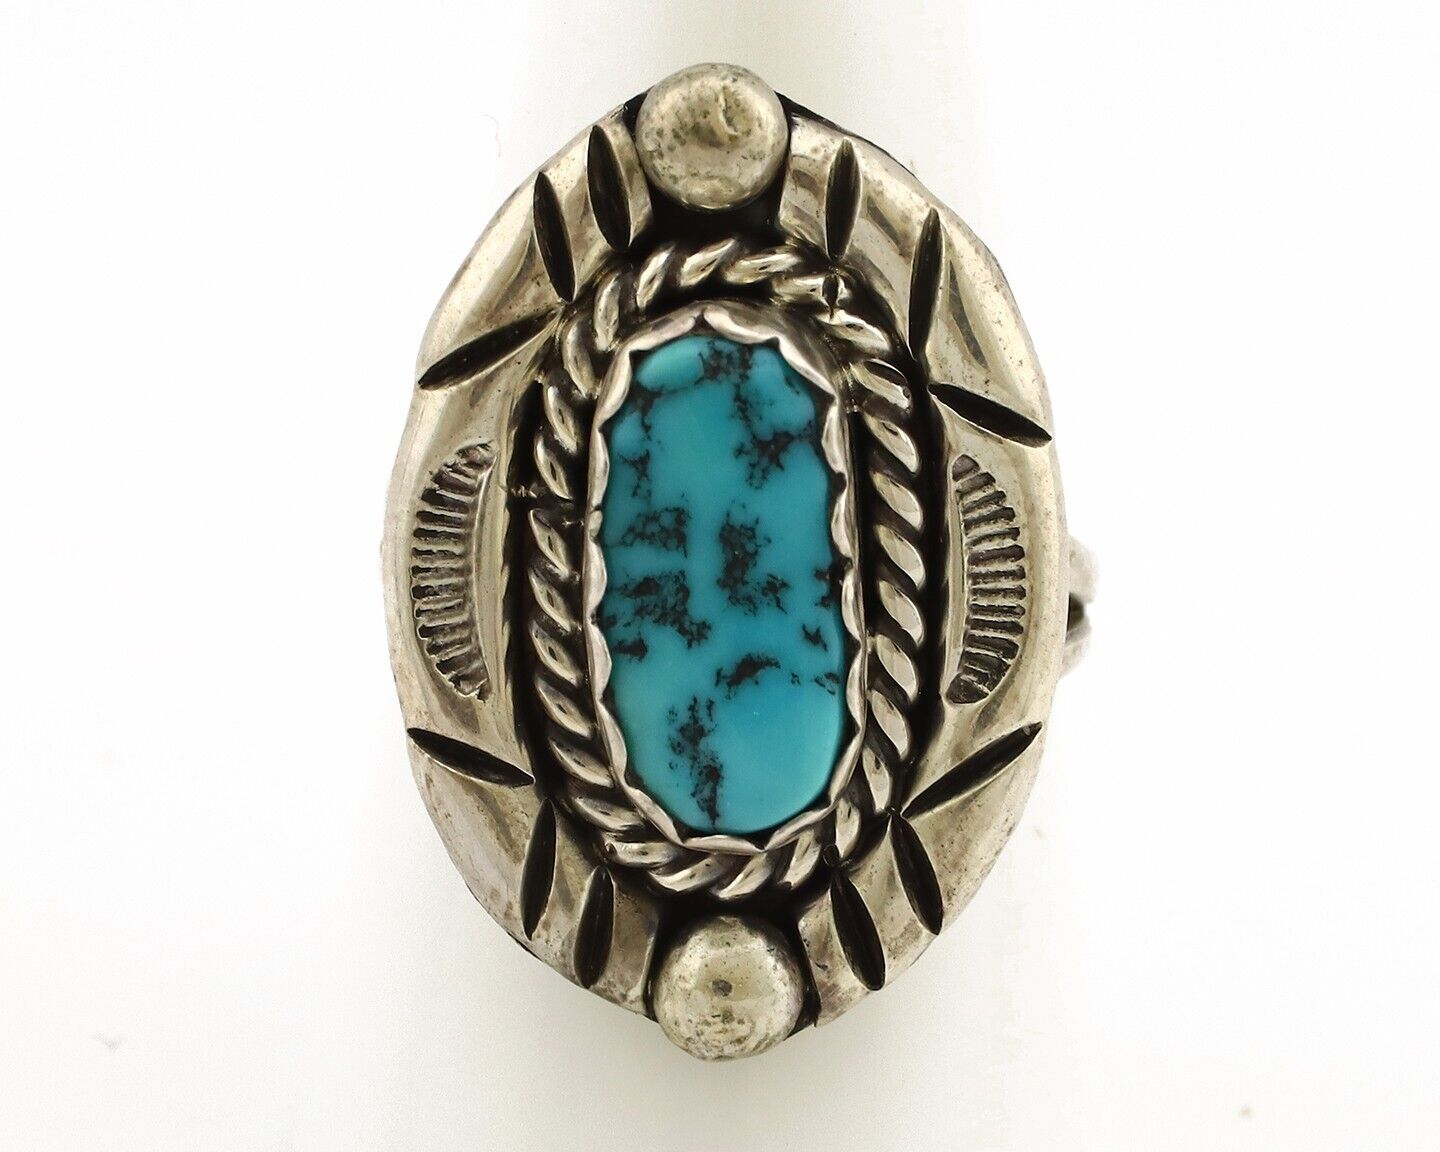 Navajo Ring 925 Silver Sleeping Beauty Turquoise Signed V & N EDSITTY C.80's